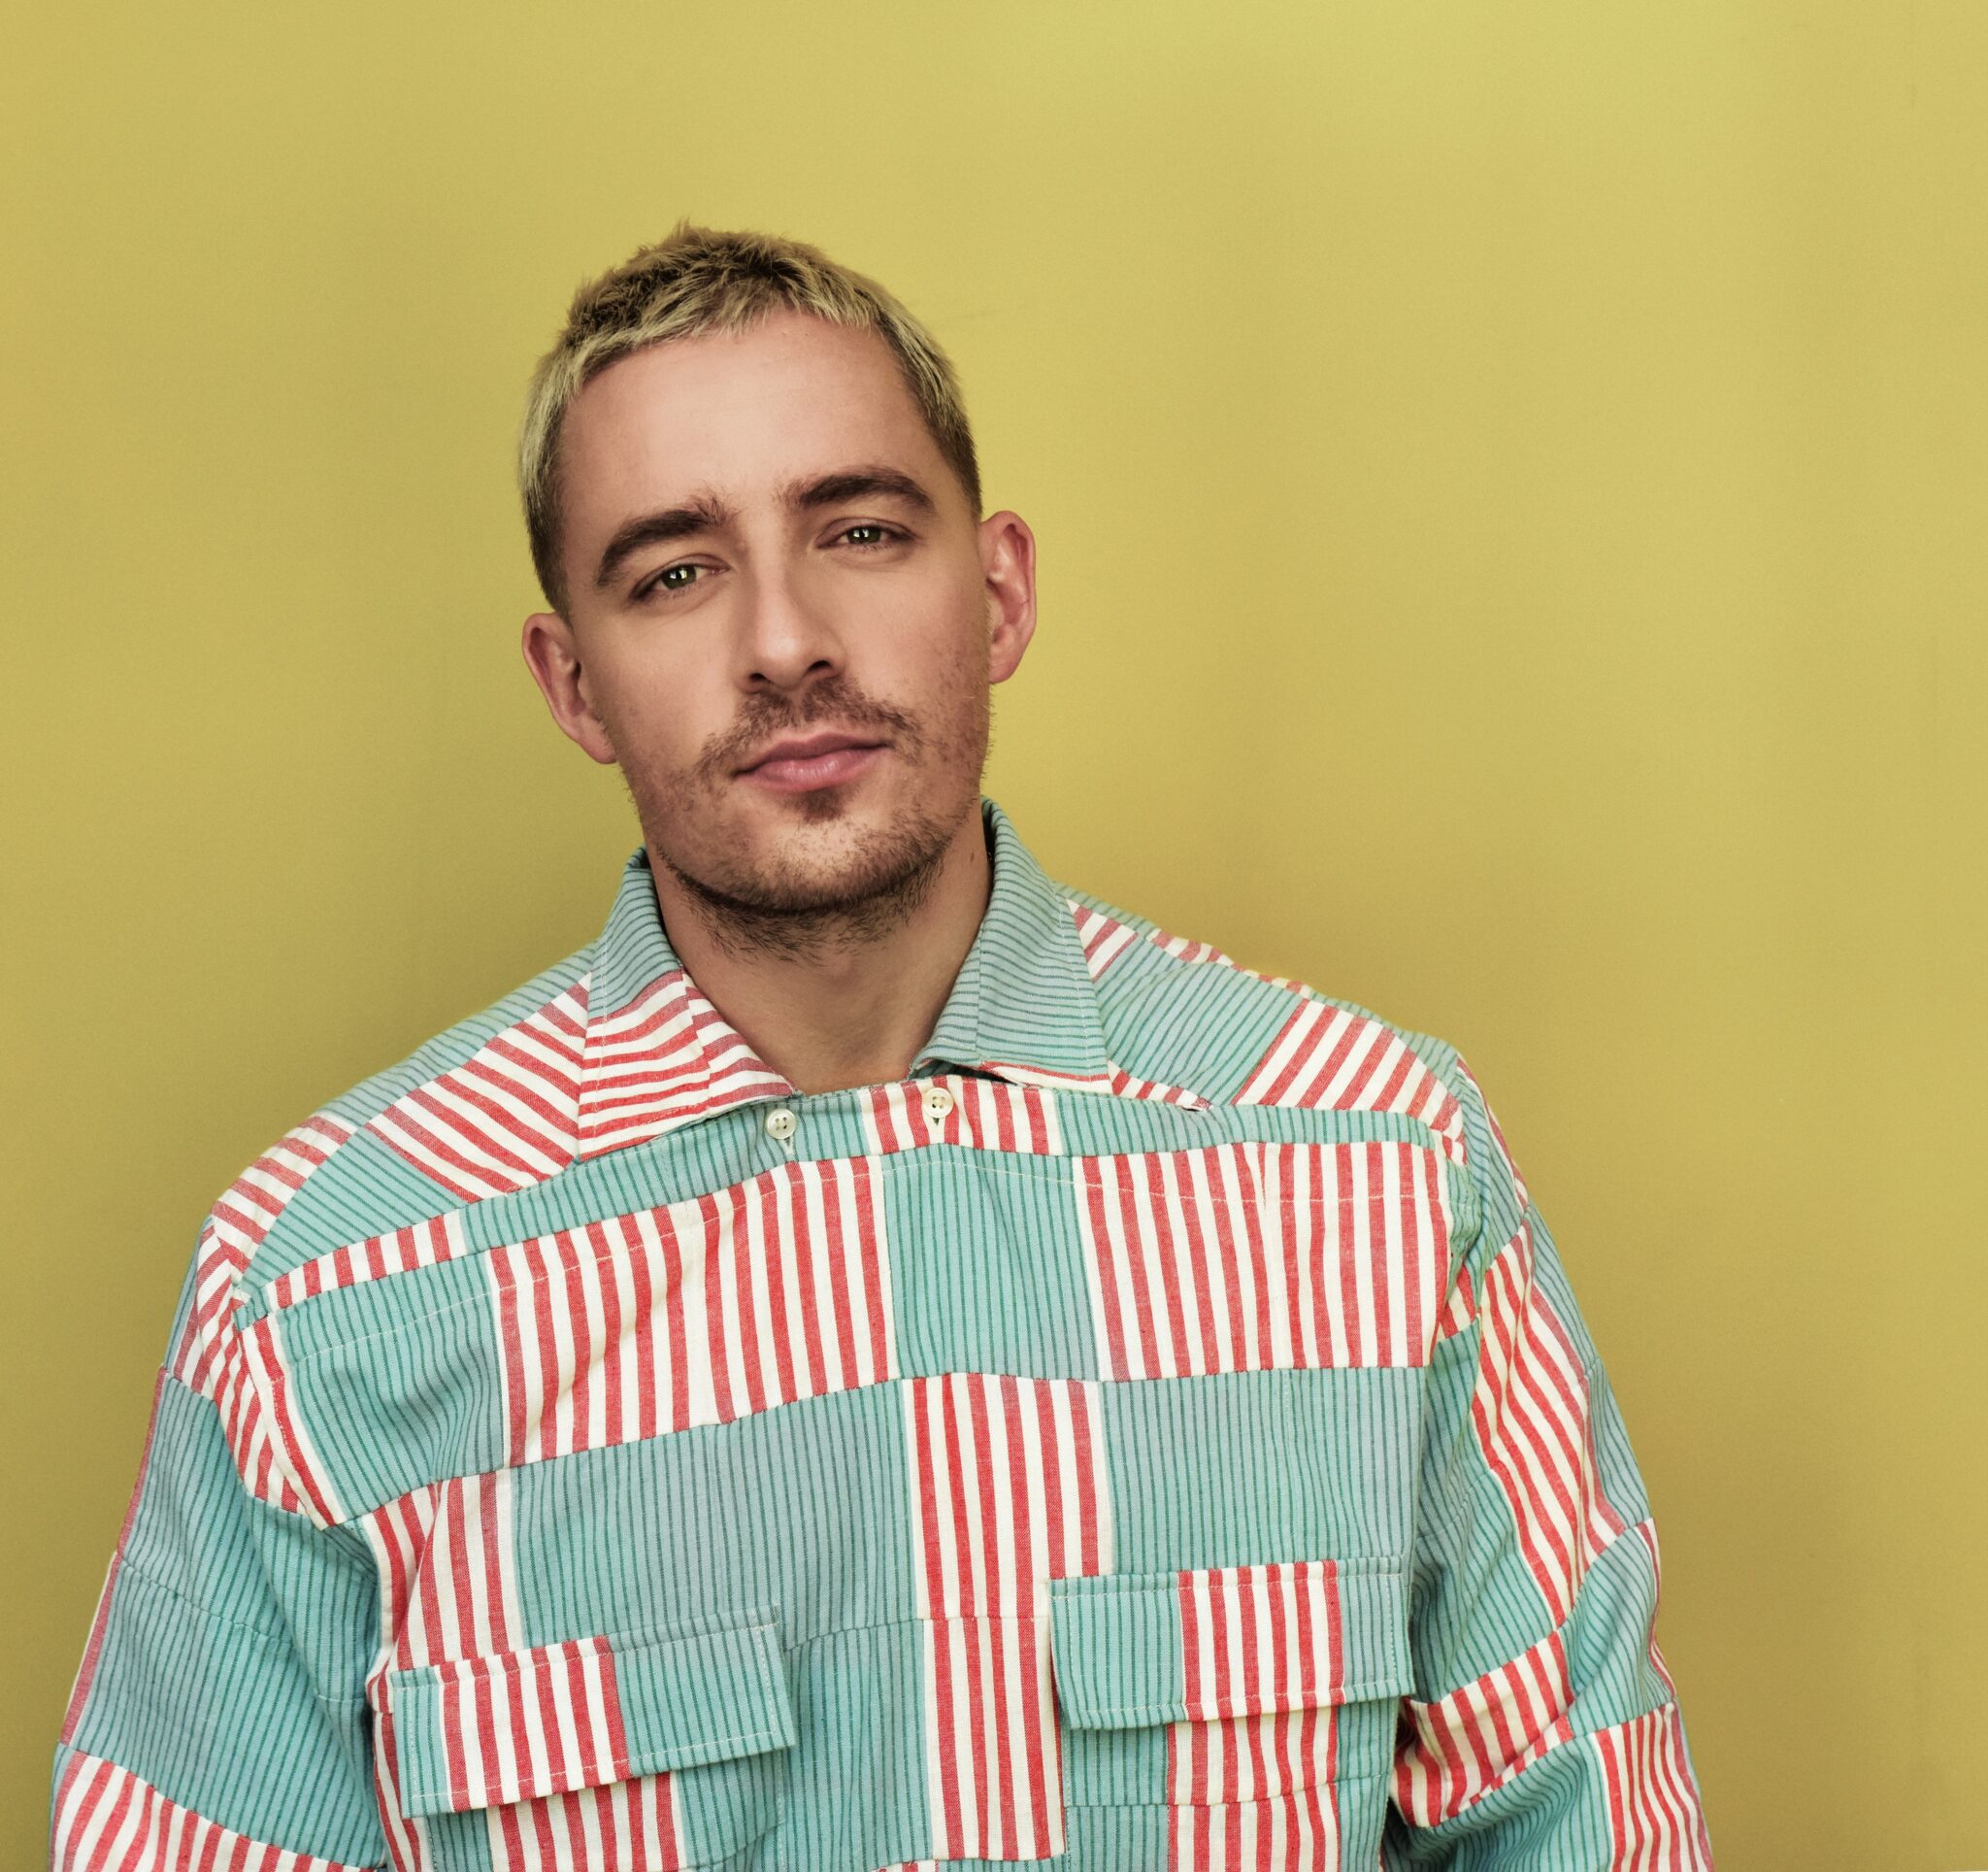 Dermot Kennedy goes on tour in 2023 eight concerts in Germany! World